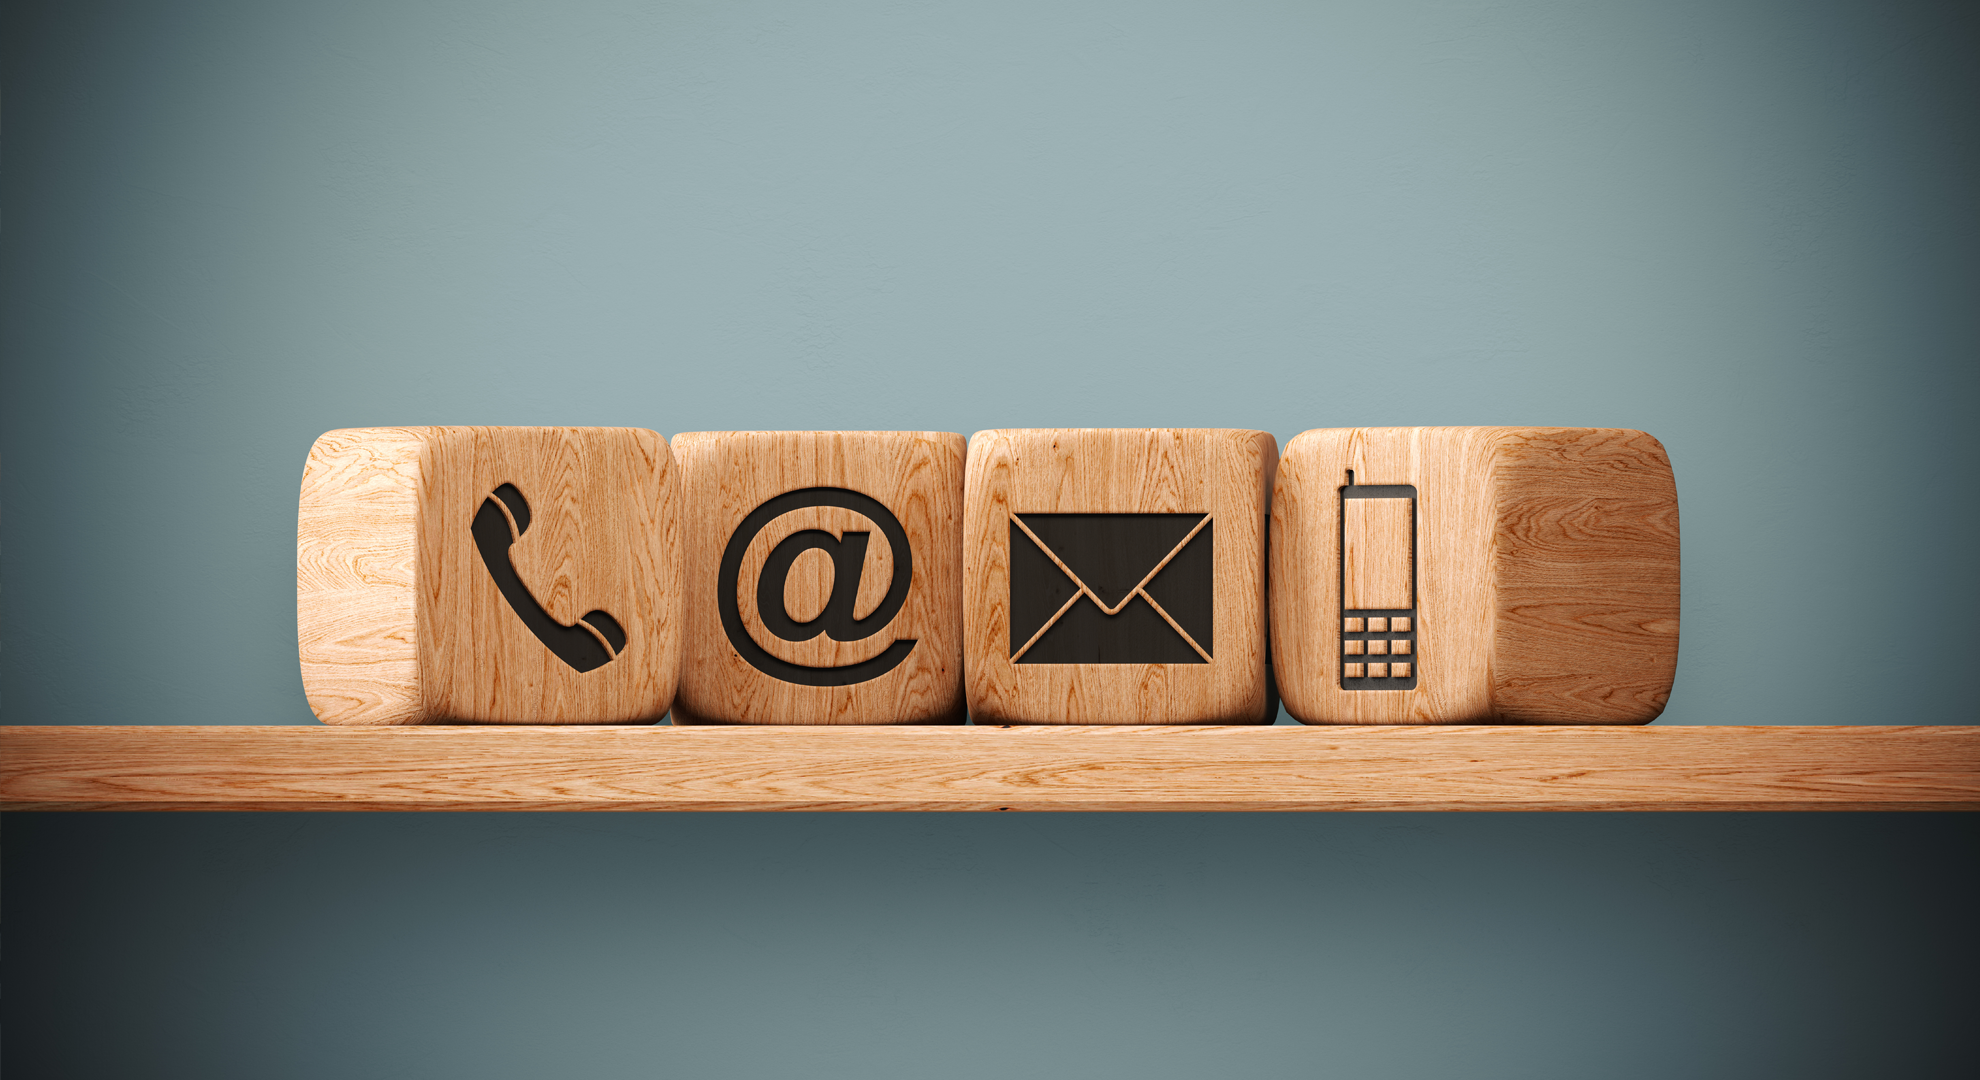 Abstract image of wooden blocks showing symbols for phone, email and mail.